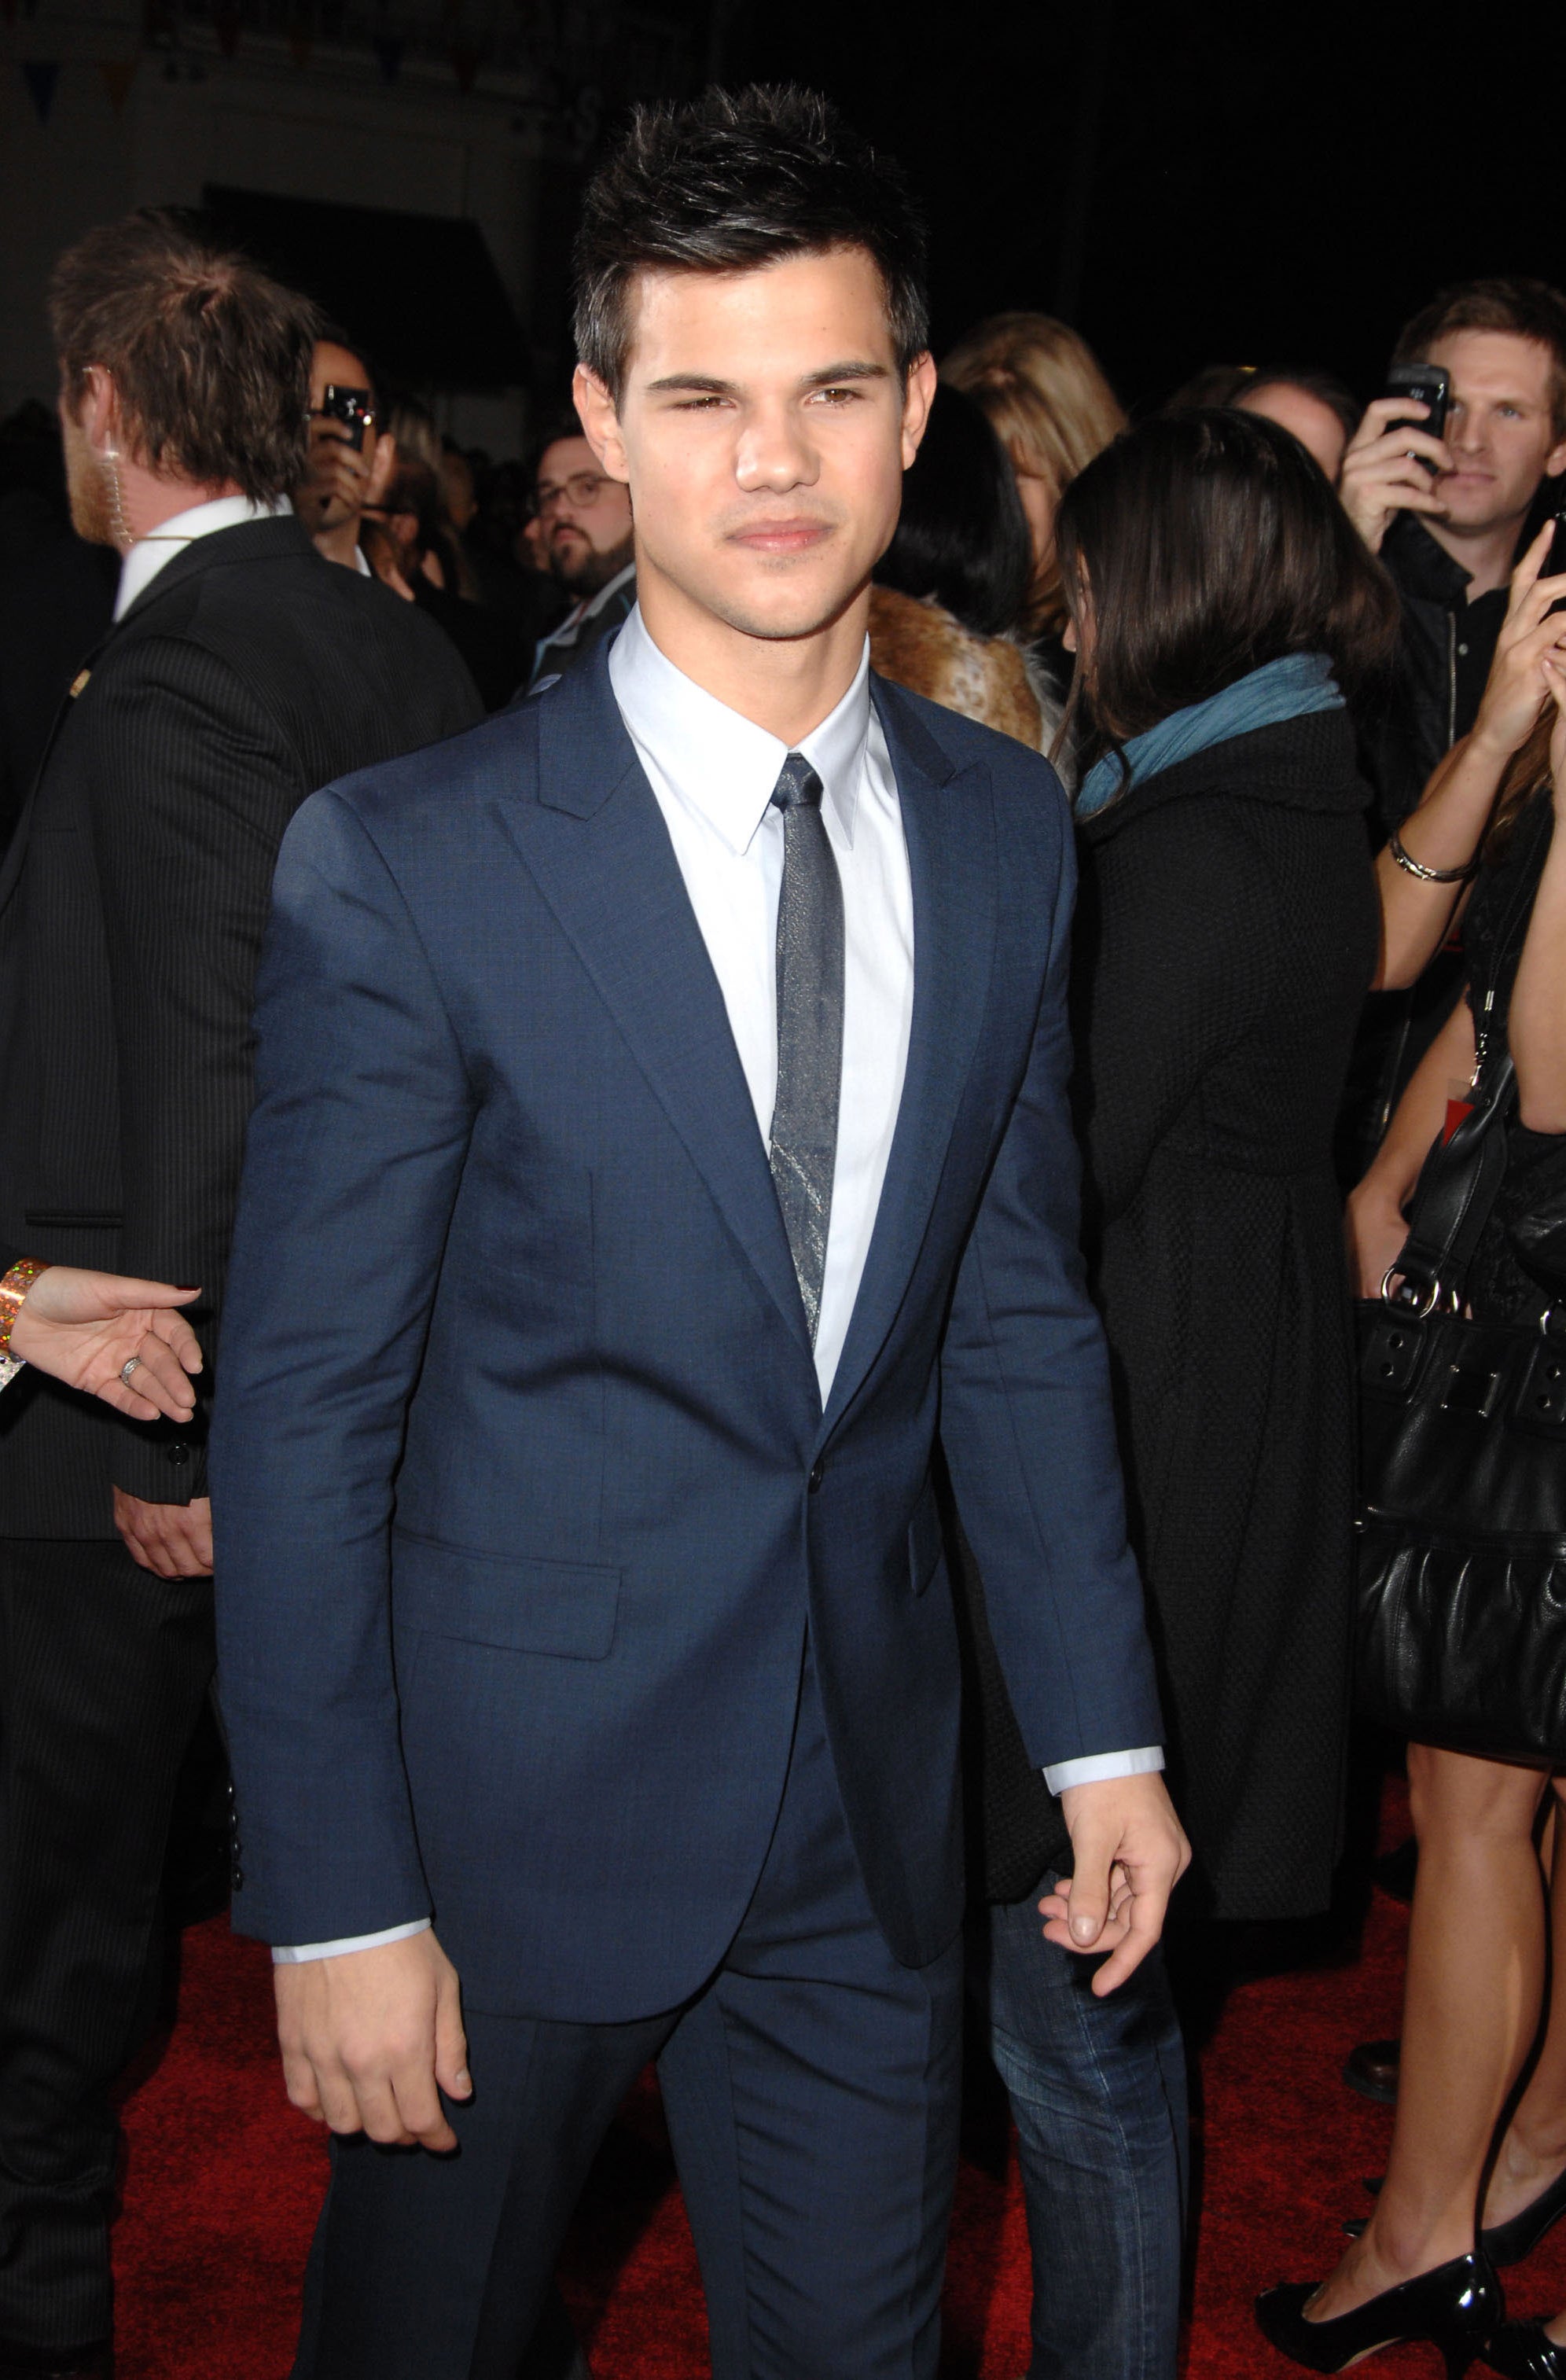 Tyler in a suit and tie on the red carpet